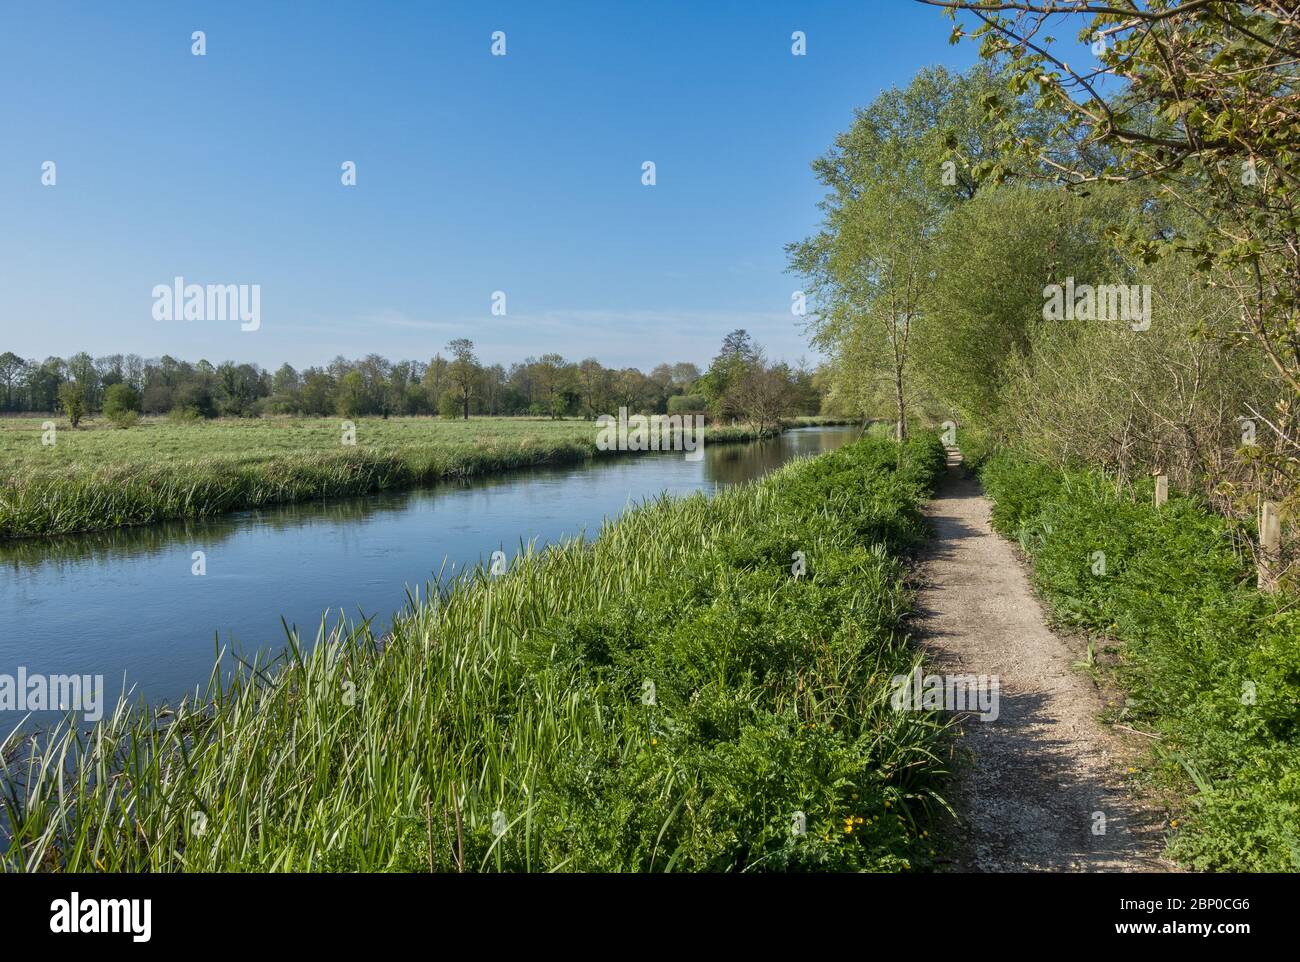 The Itchen Way between Eastleigh and Southampton. A long-distance footpath following the River Itchen in Hampshire, England, UK Stock Photo